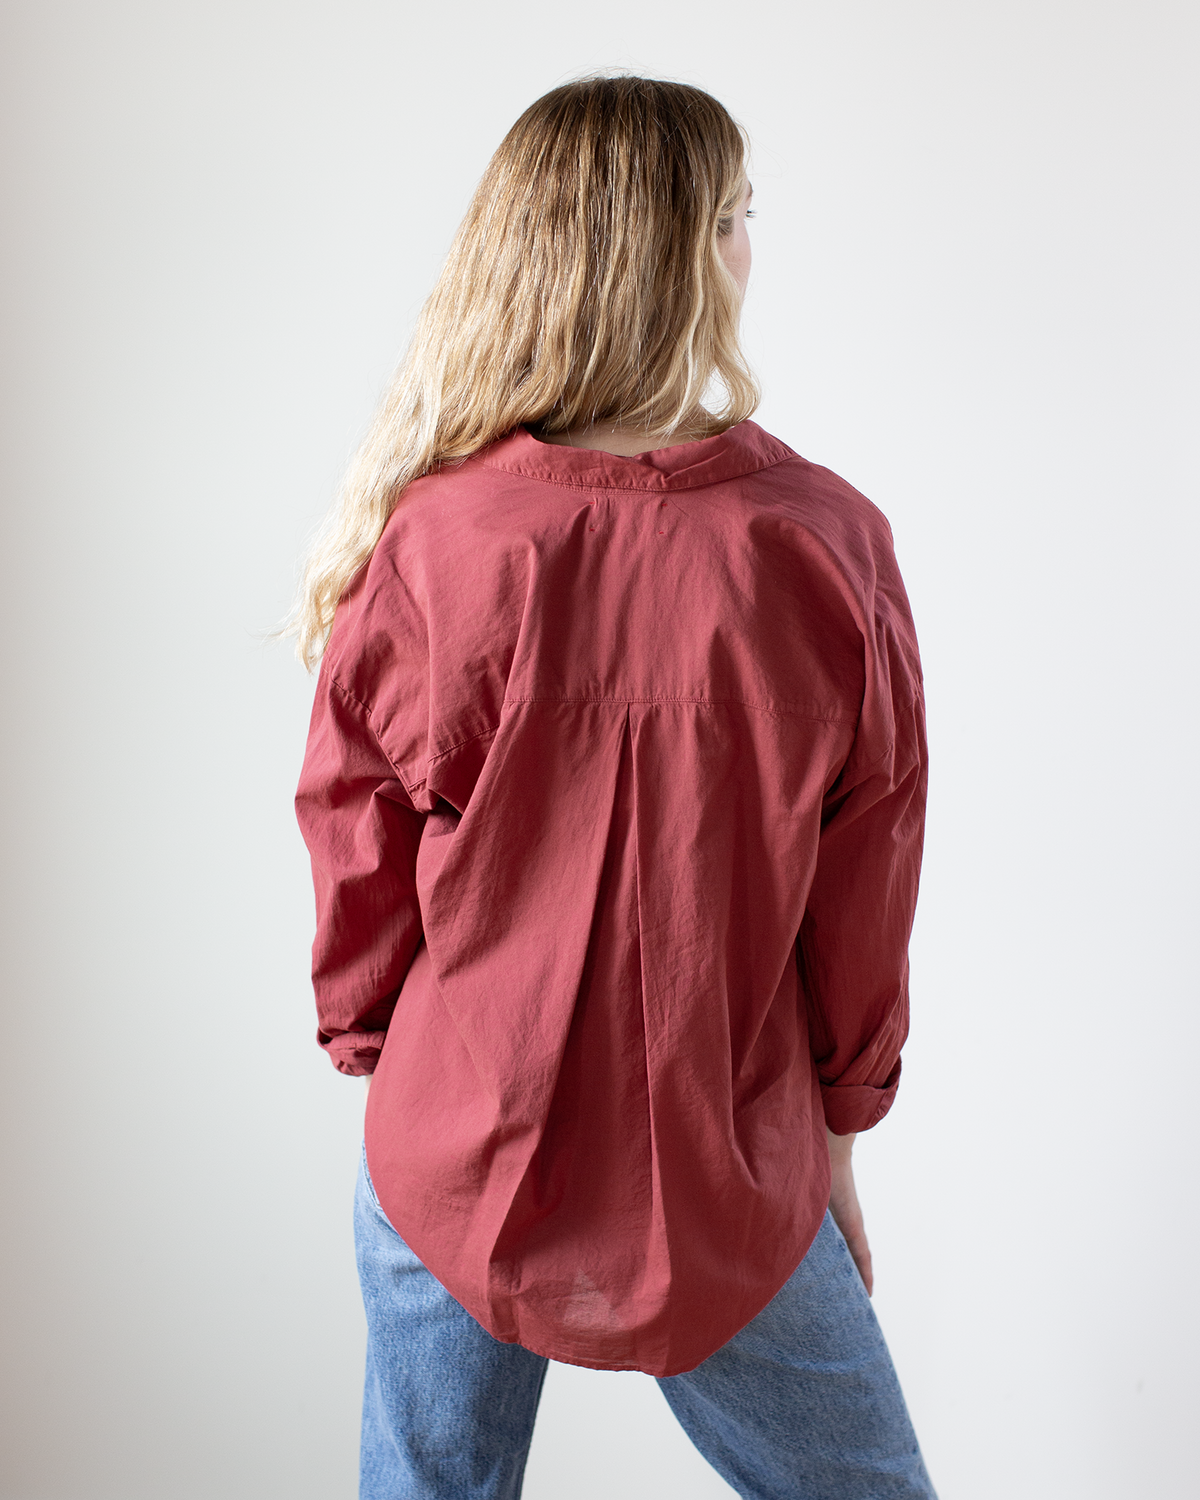 Jace Shirt in Brick Red